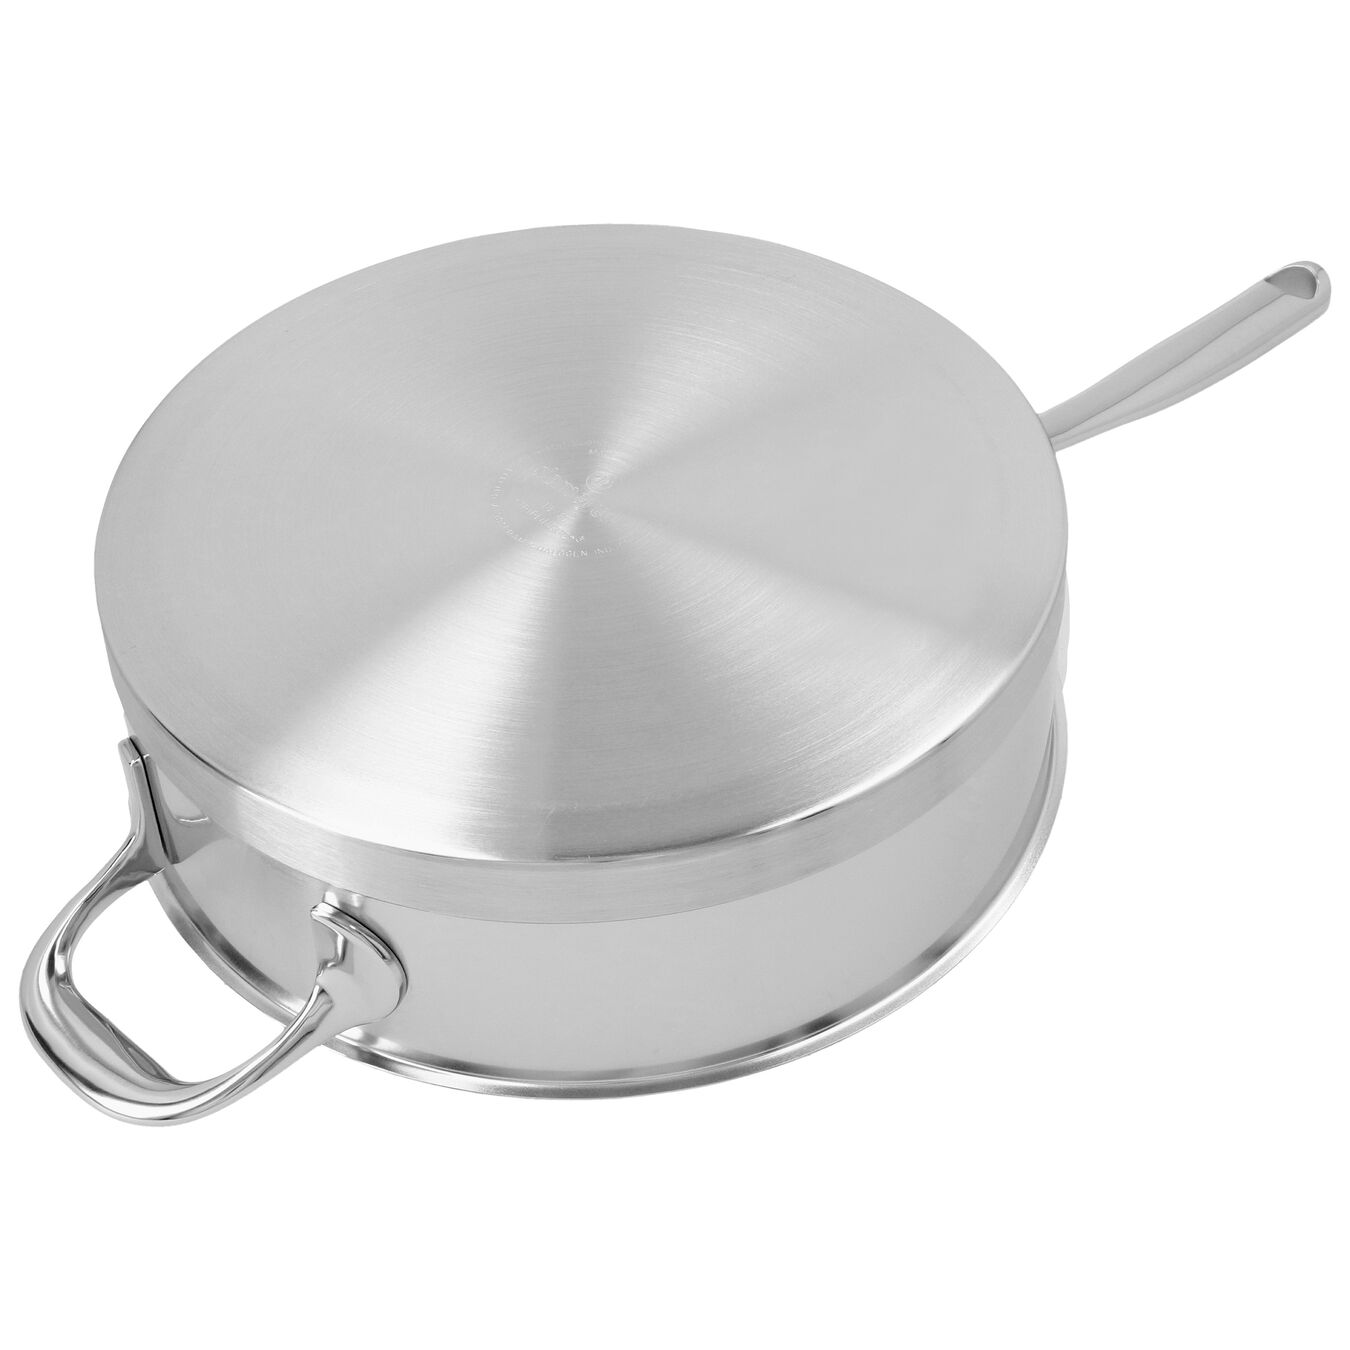 9.5-inch Sauté Pan with Helper Handle and Lid, 18/10 Stainless Steel ,,large 2